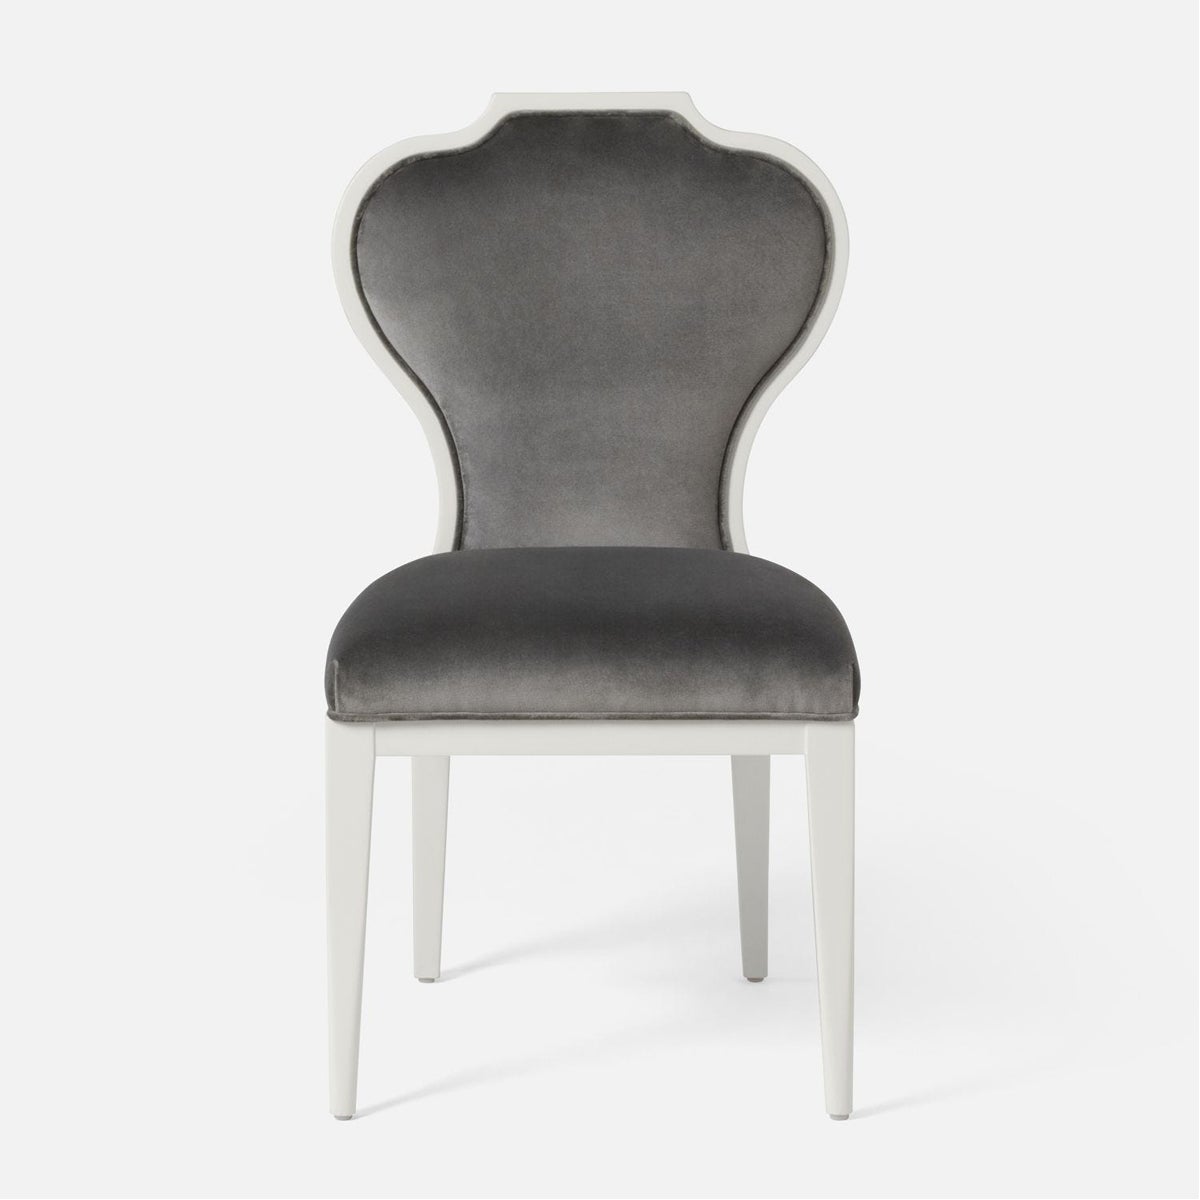 Made Goods Joanna Dining Chair in Volta Fabric